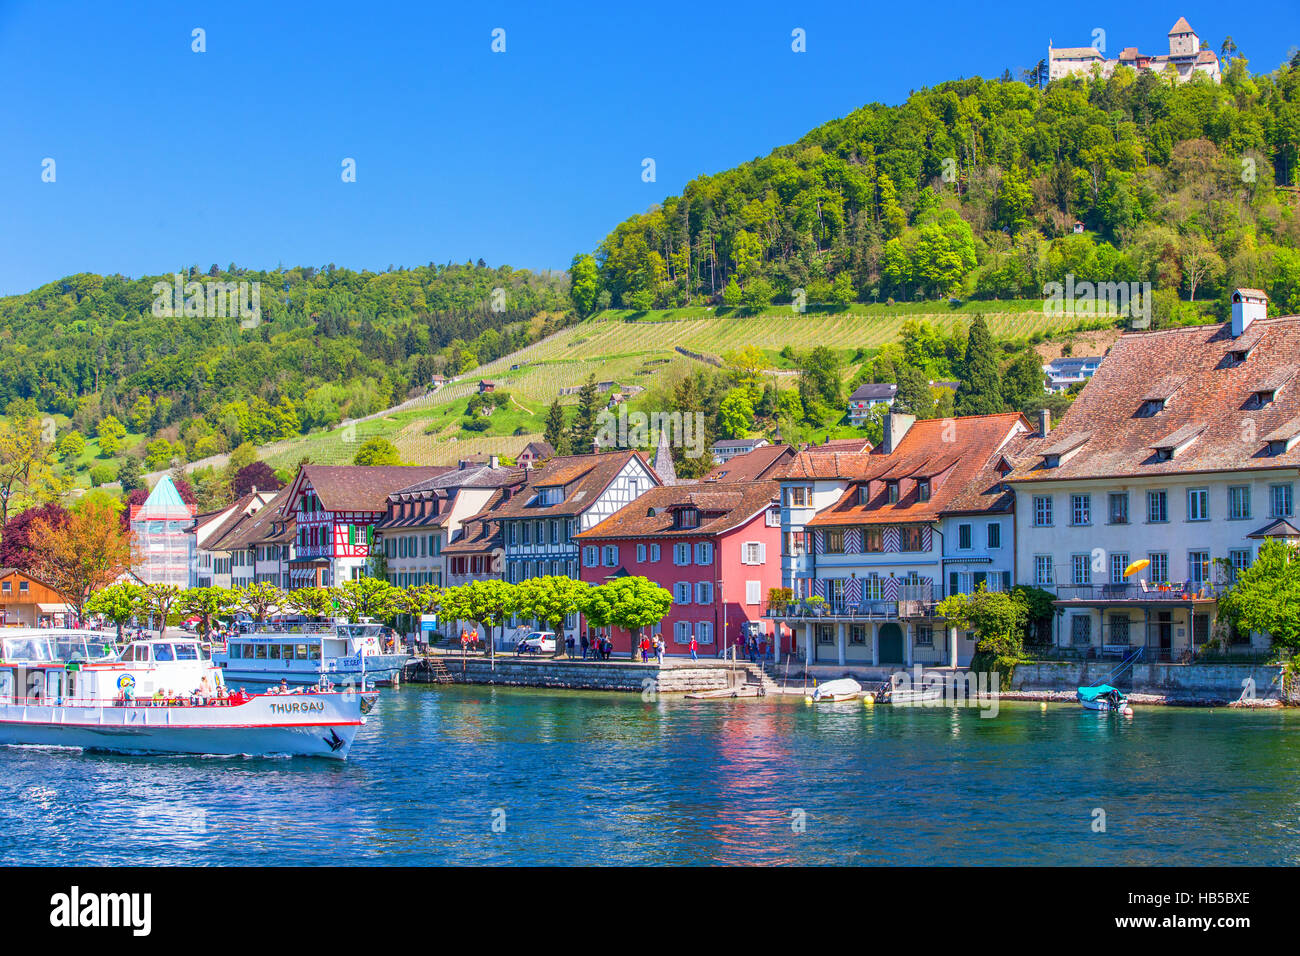 Excursion boat on Rhein river with castle in old city center of Stein am Rhein village with colorful old houses Stock Photo